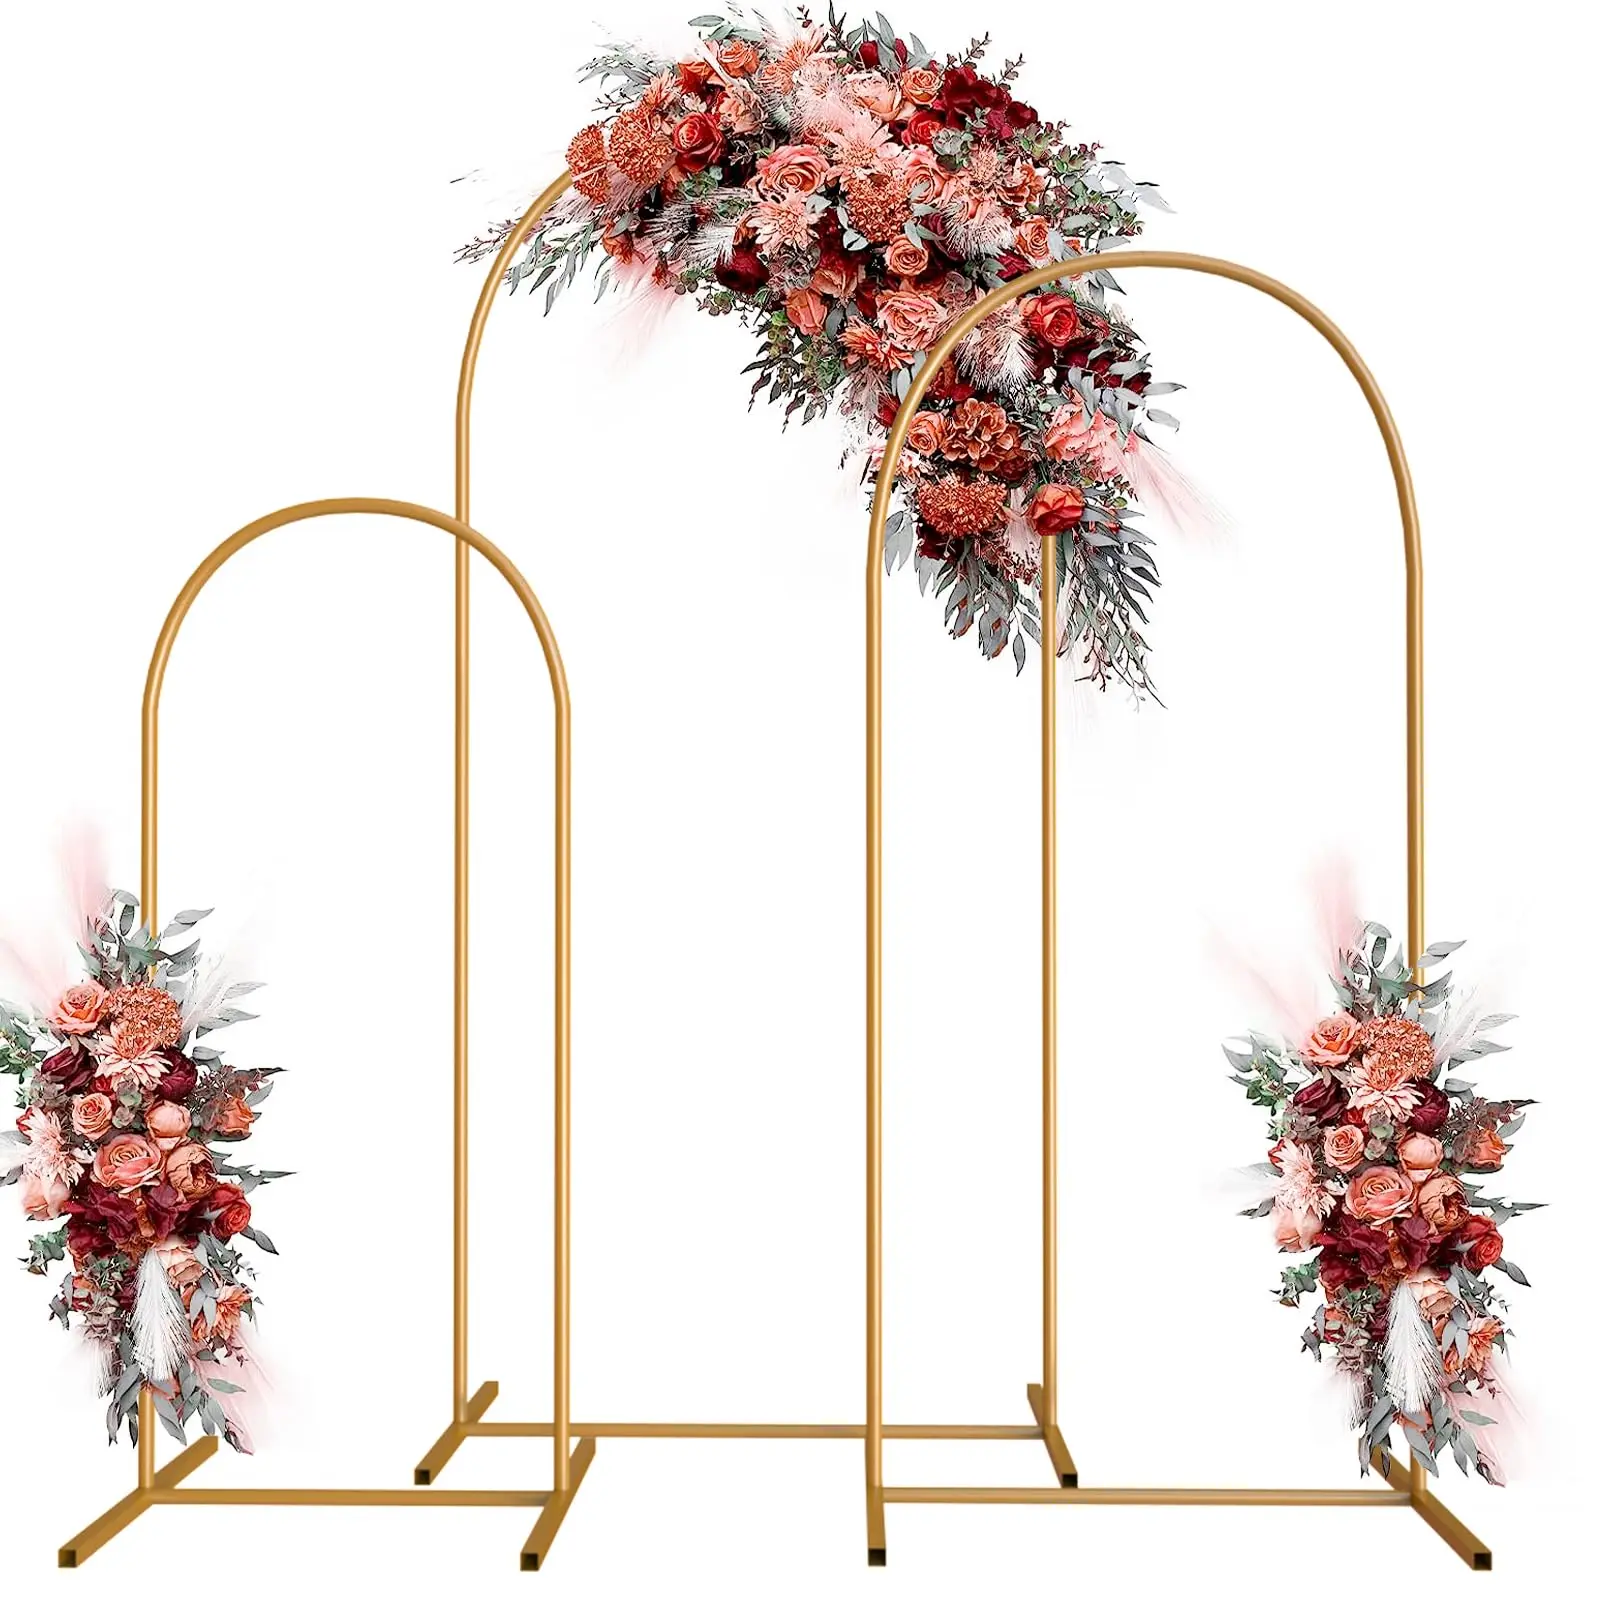 

Metal Wedding Arch Backdrop Stand Set of 3 6FT 5FT 4FT Gold Balloon Arch Frame Stands for Wedding Ceremony Birthday Party Baby